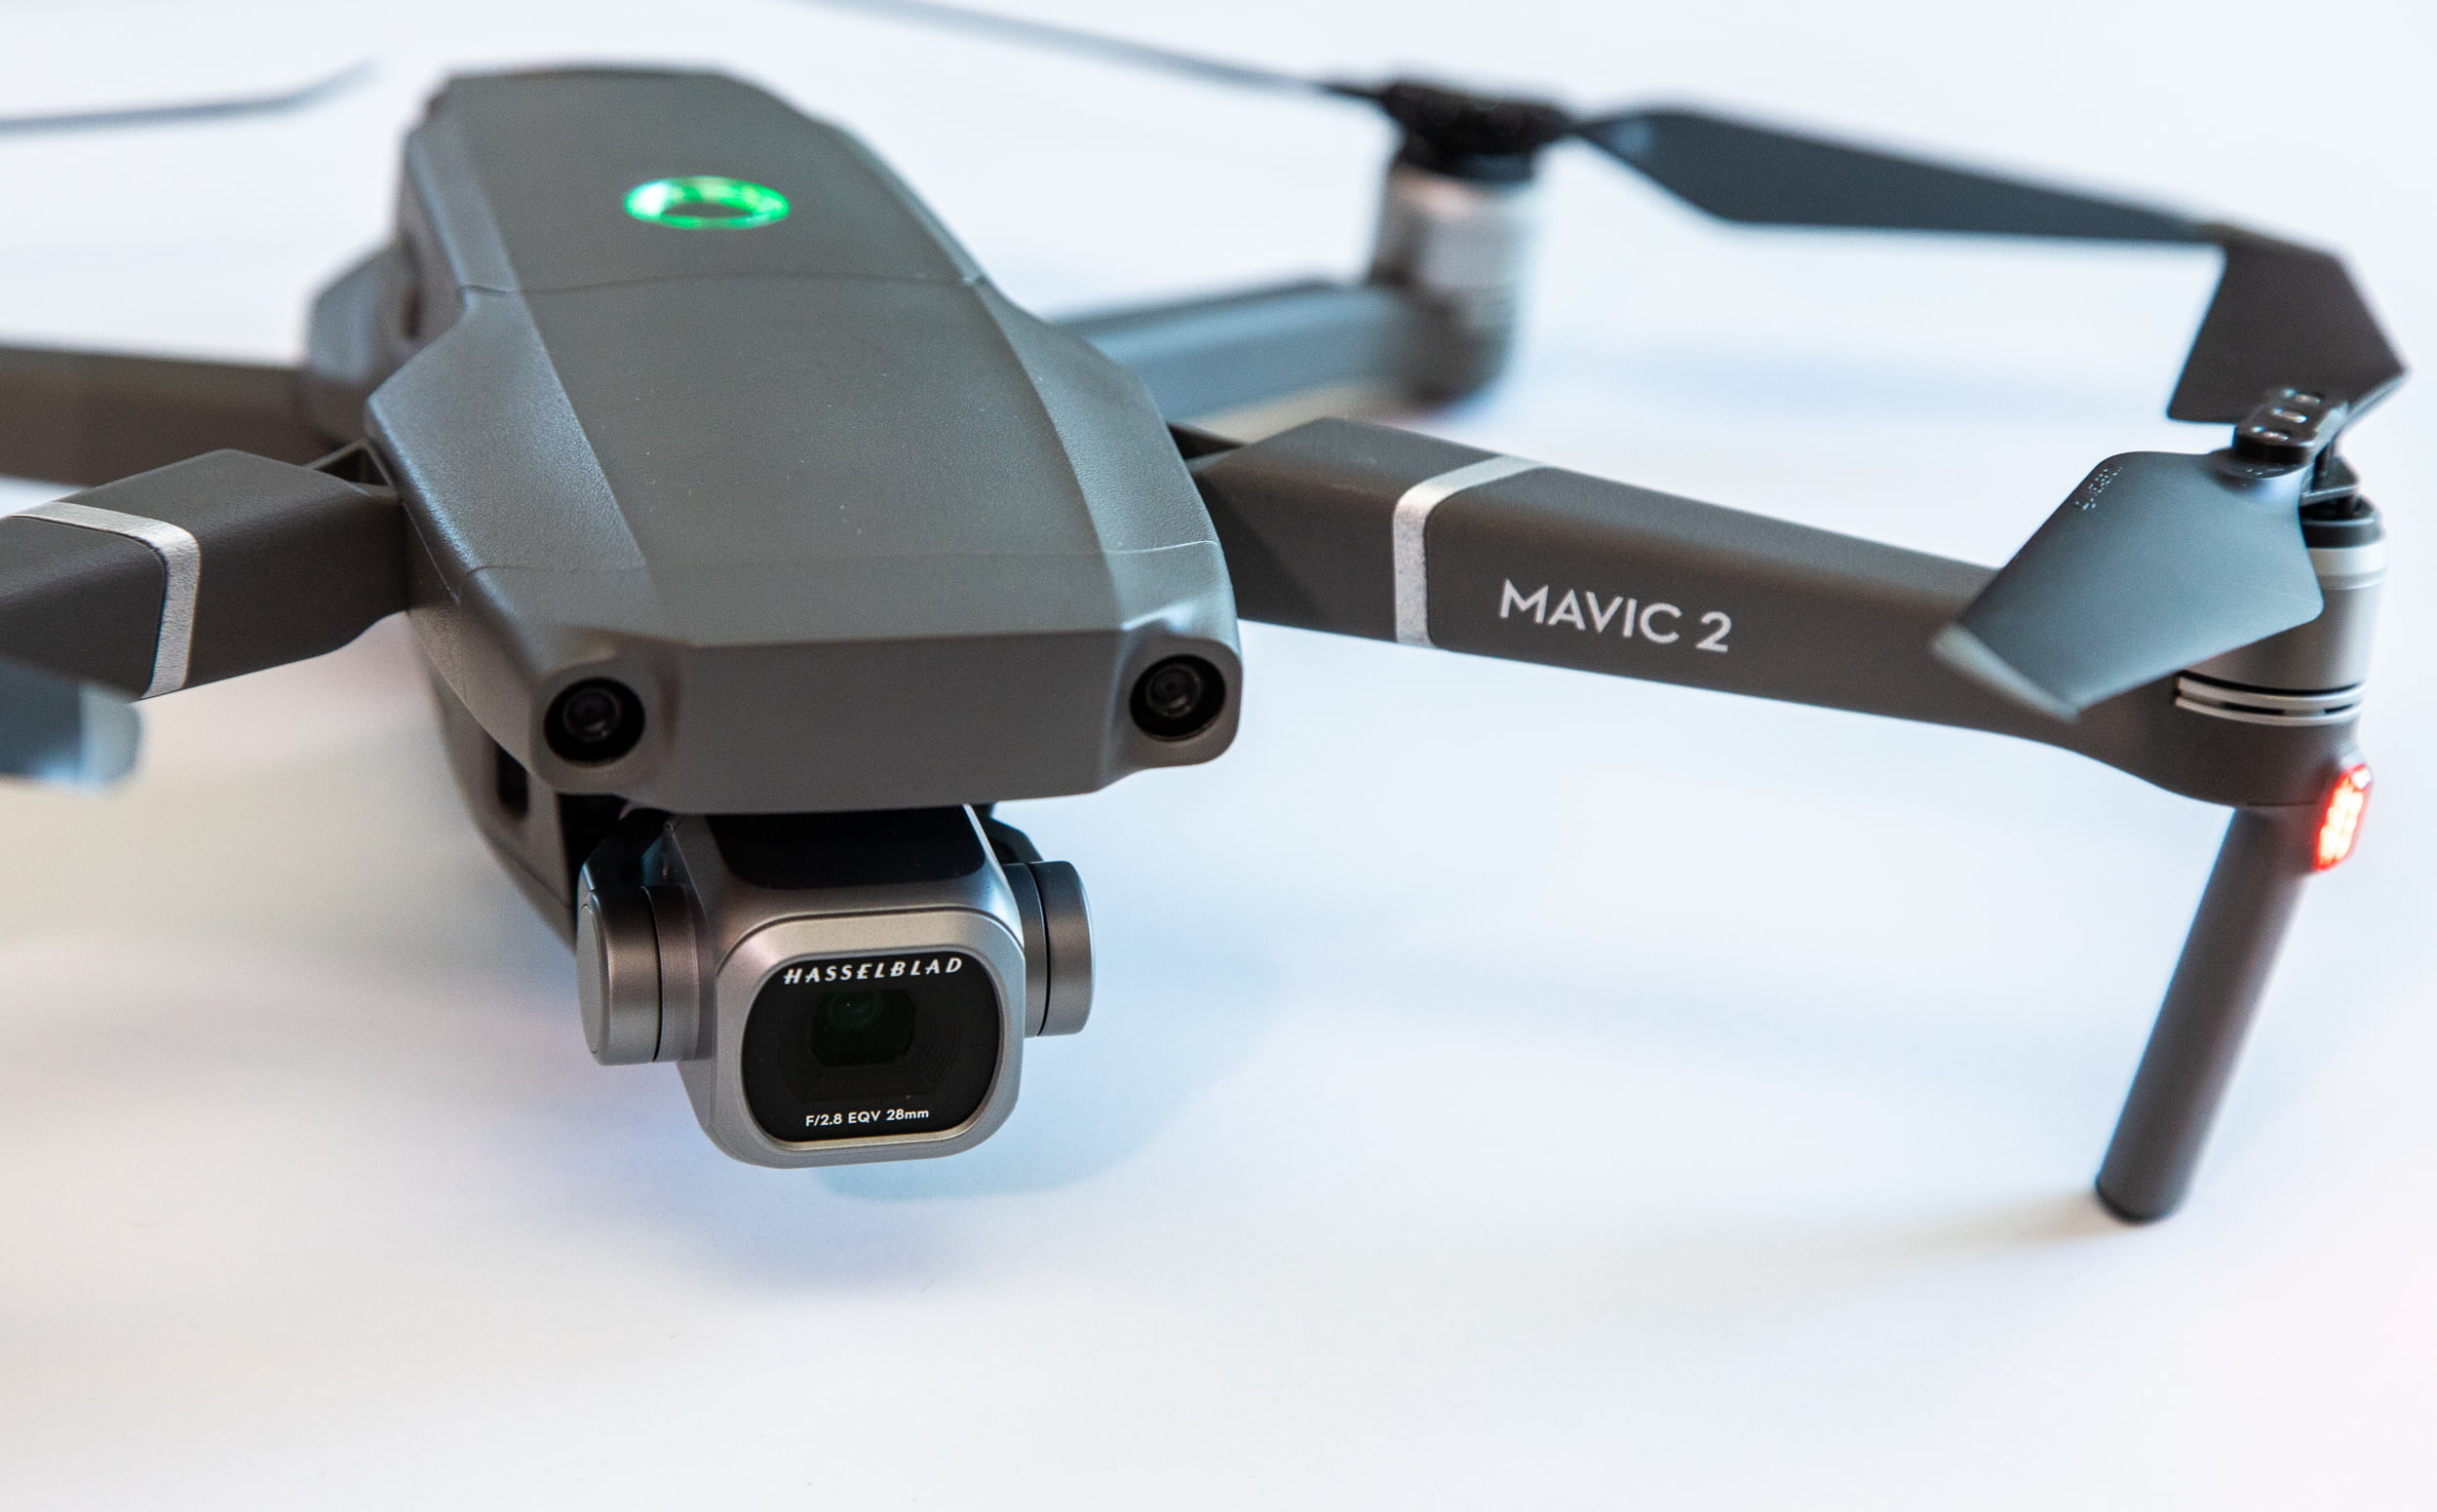 Review: DJI Mavic 2 Pro with Hasselblad camera | The GATE